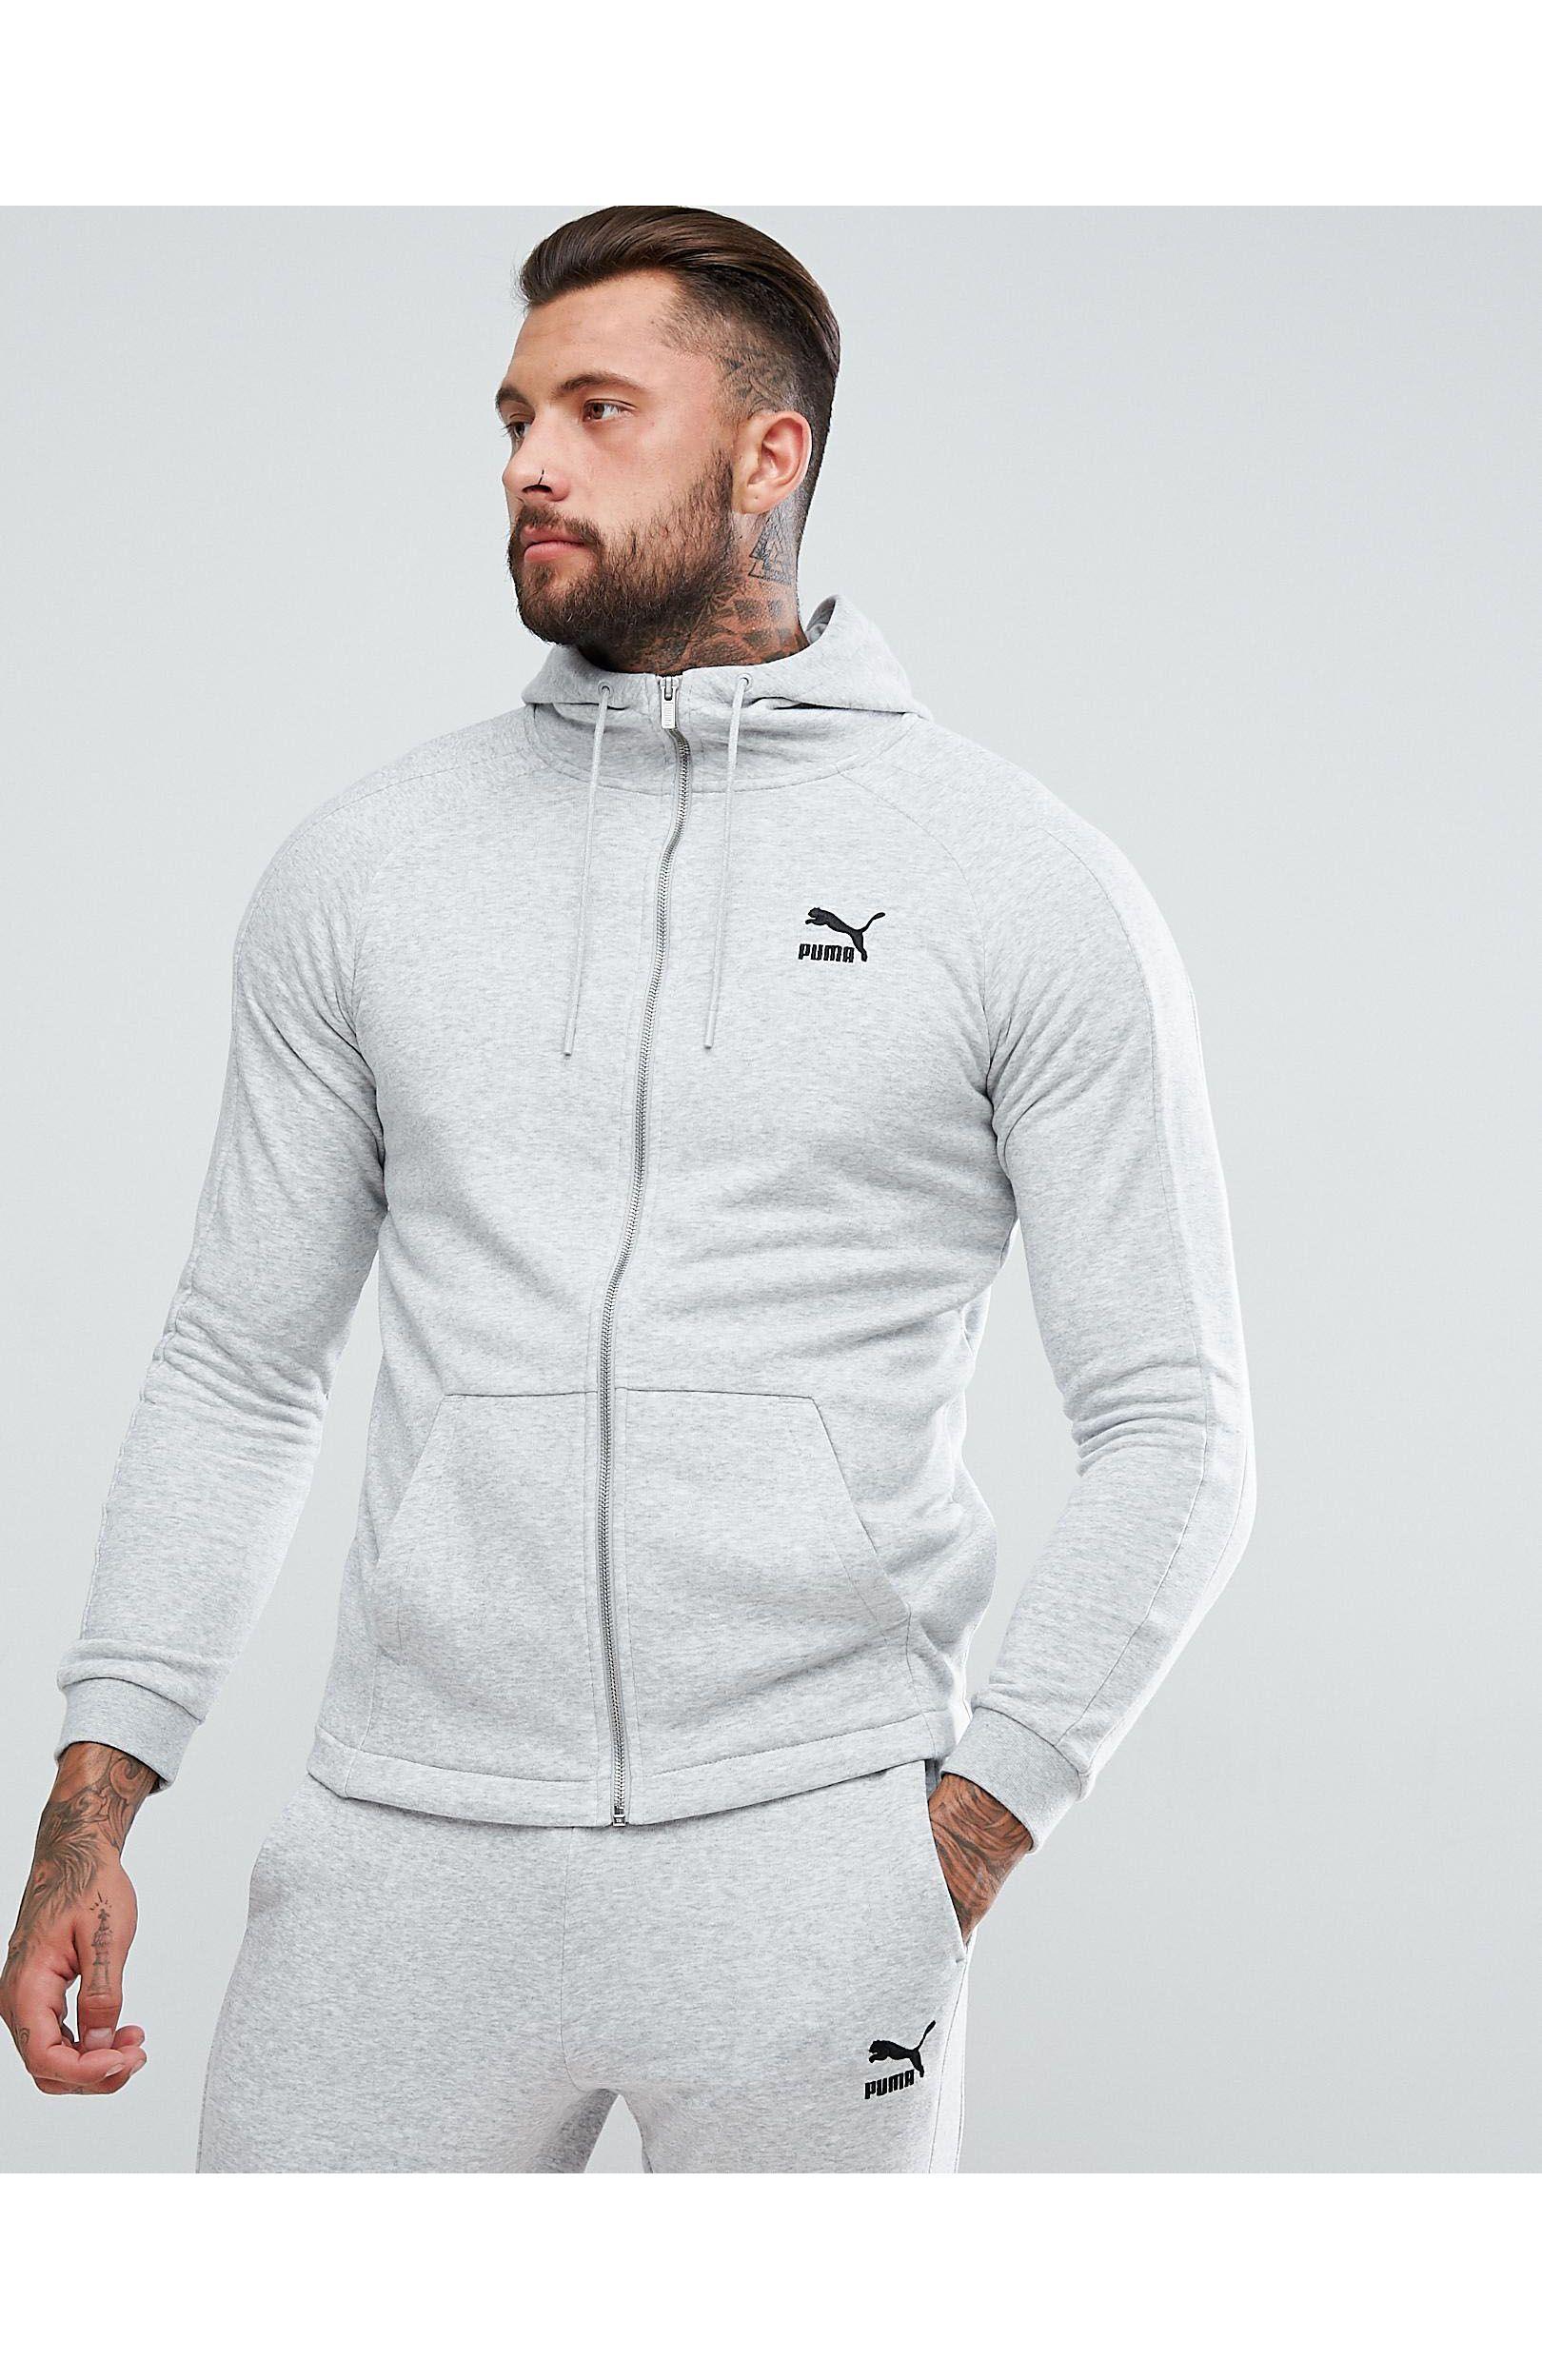 PUMA Skinny Fit Tracksuit Set In Gray Exclusive At Asos for Men - Lyst